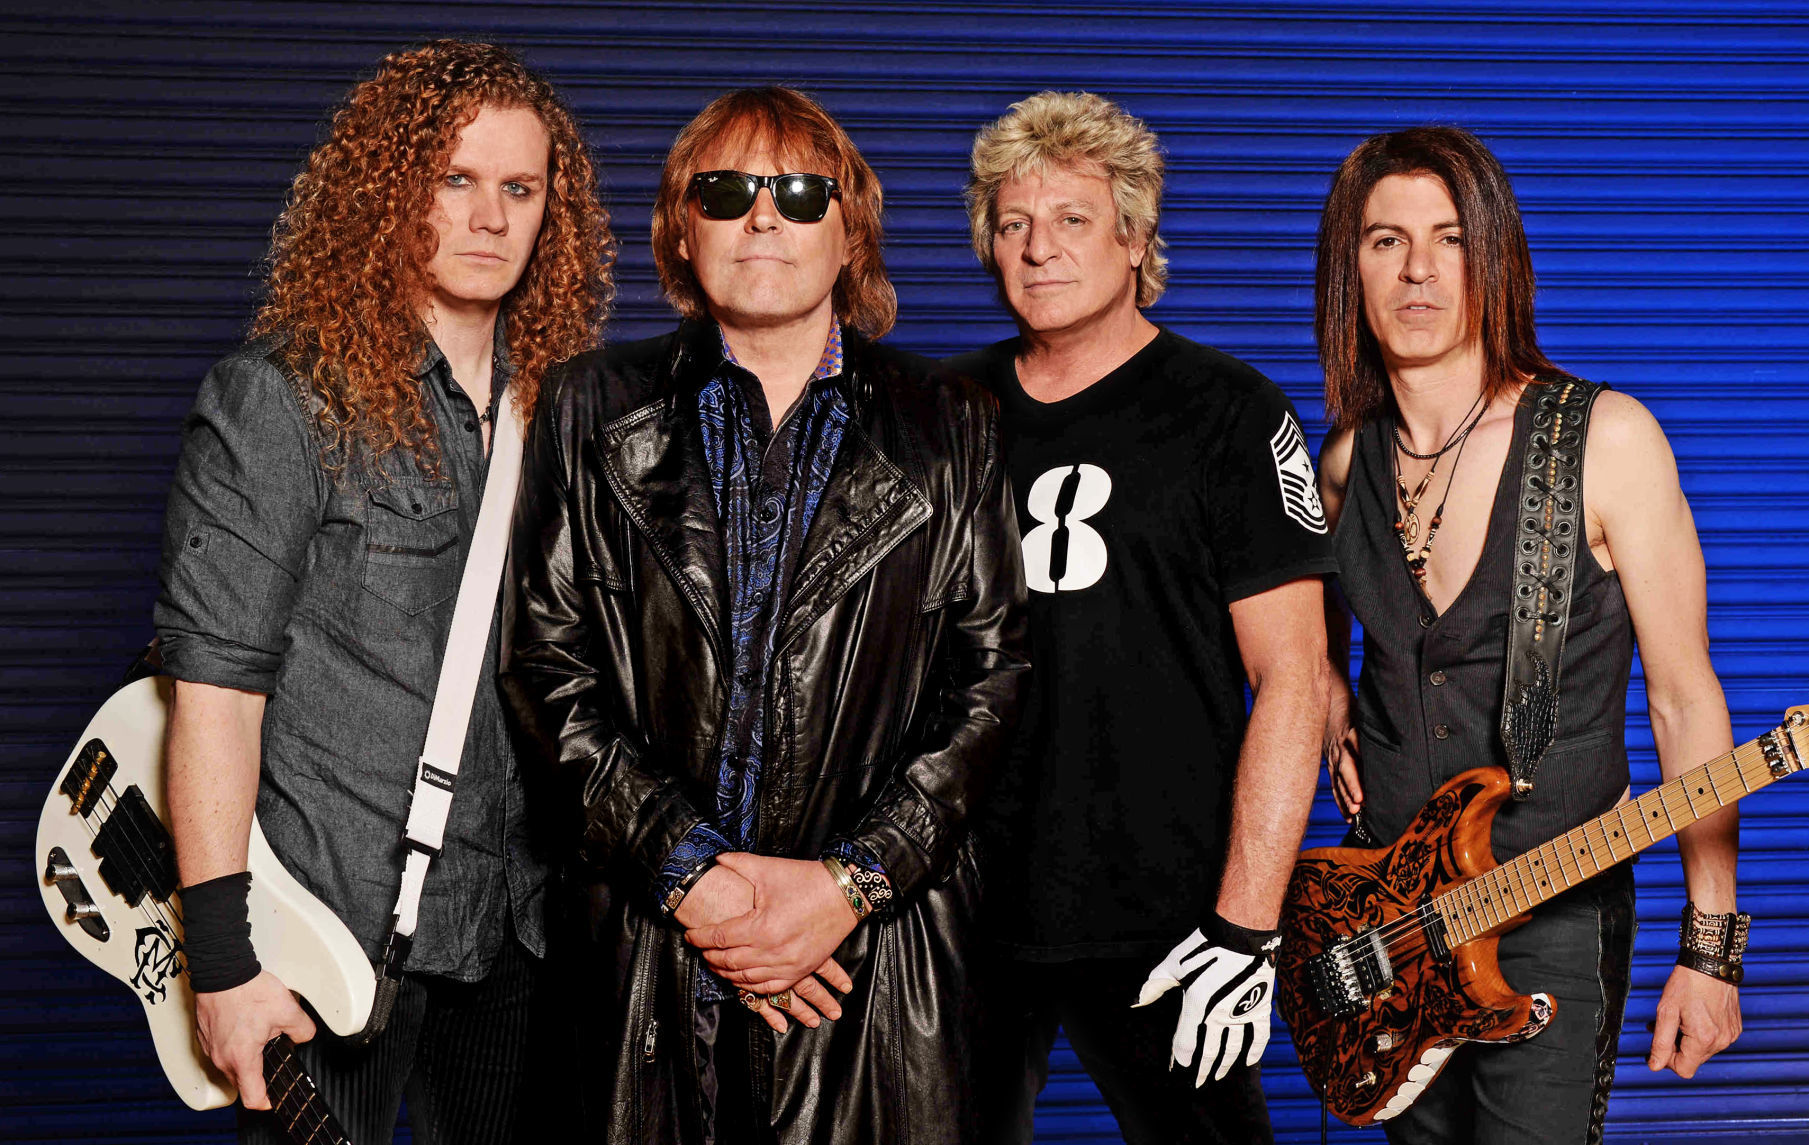 Hair metal fans rejoice — Dokken and George Lynch to play Dr